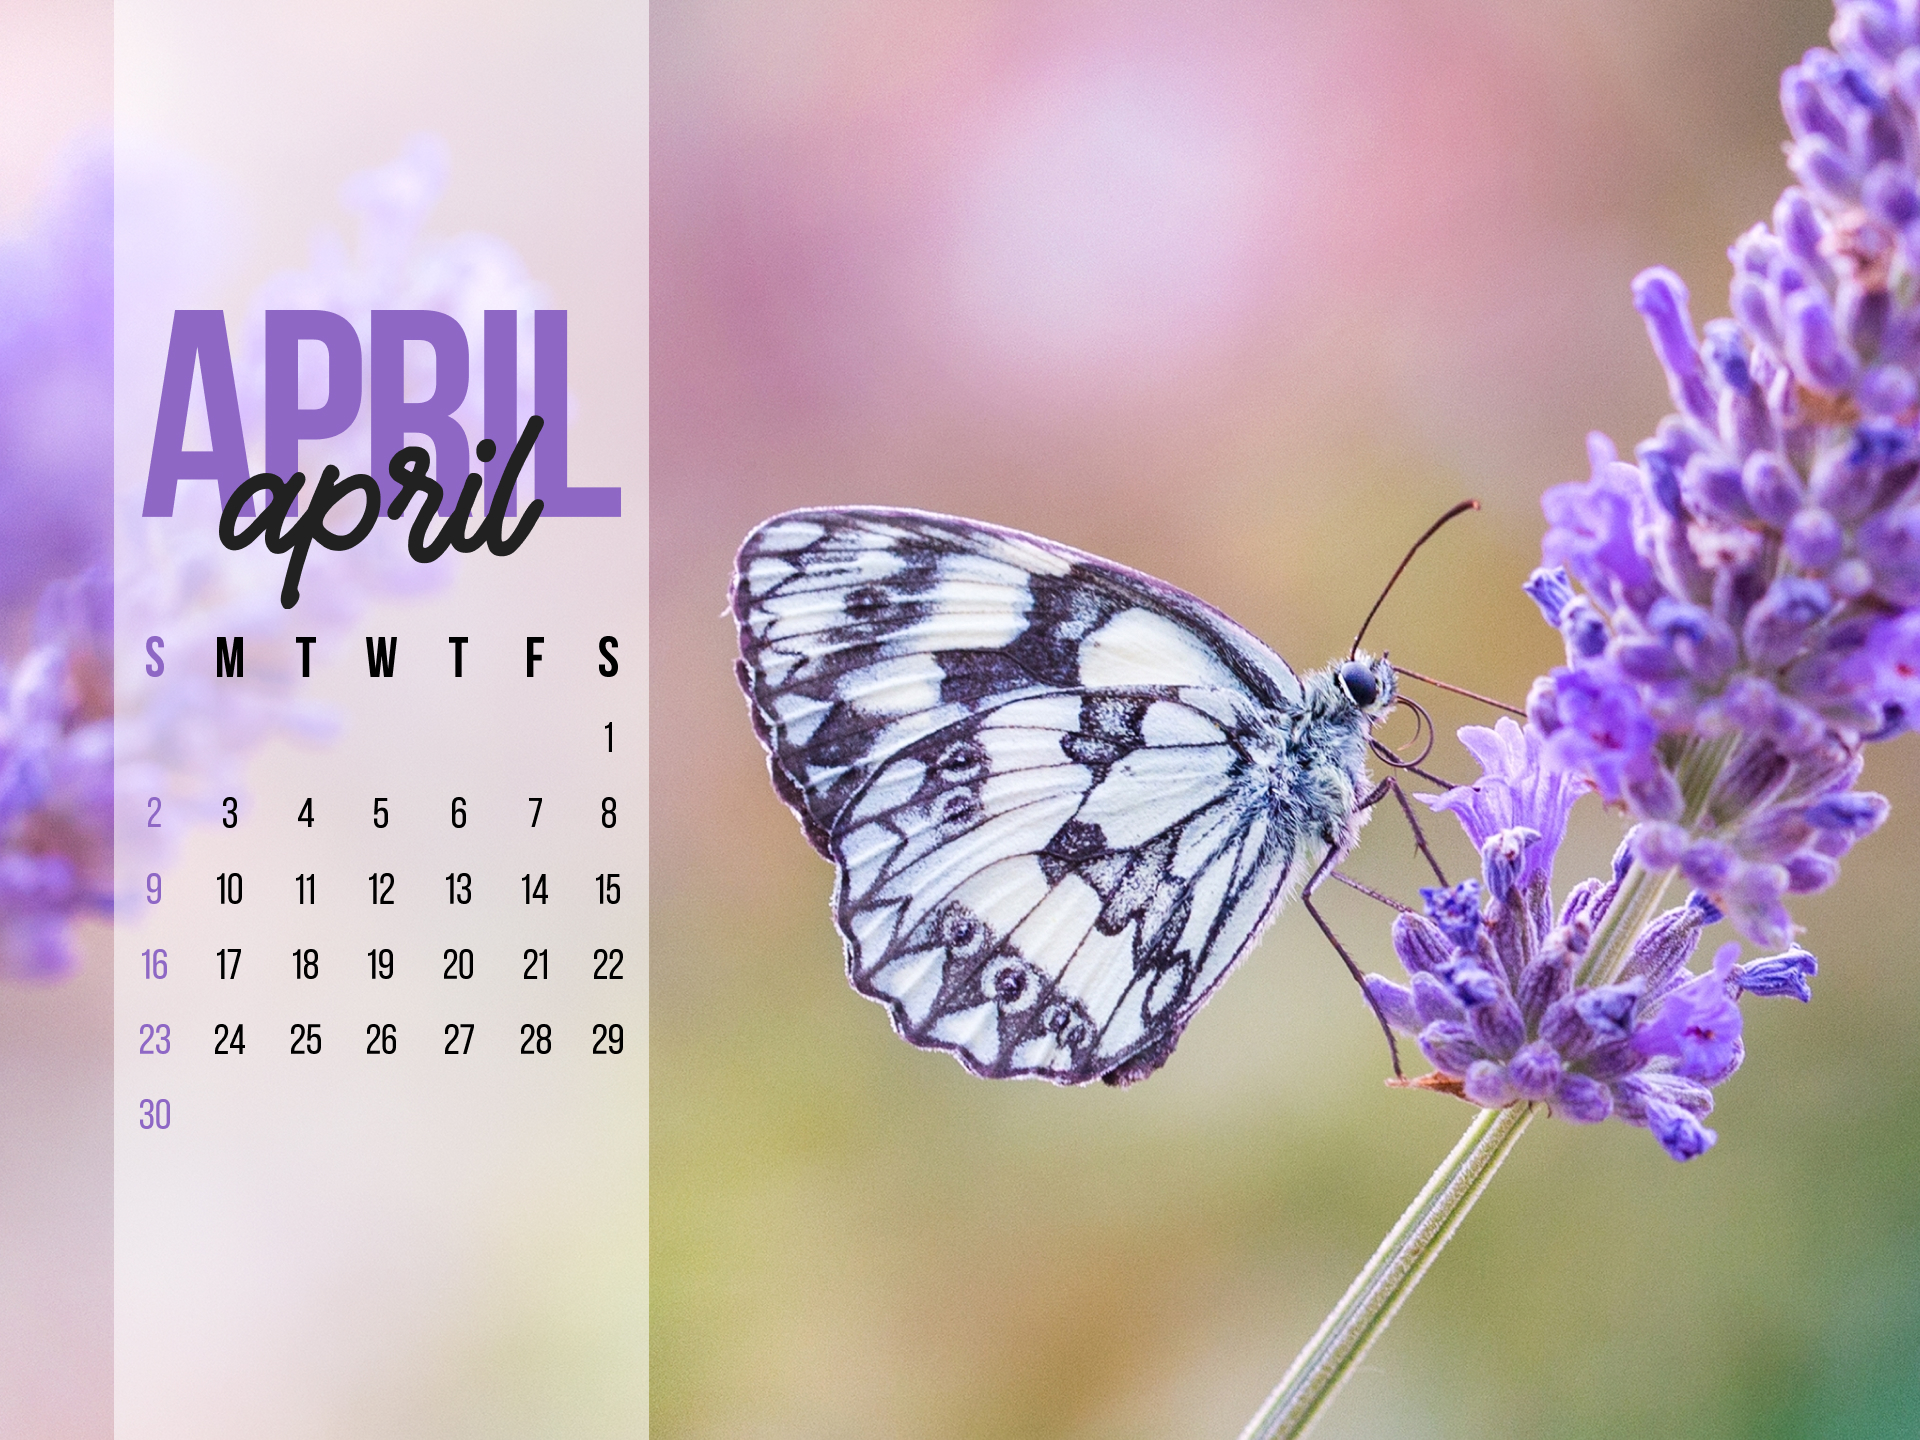 Butterfly sitting on a purple flower next to a calendar.